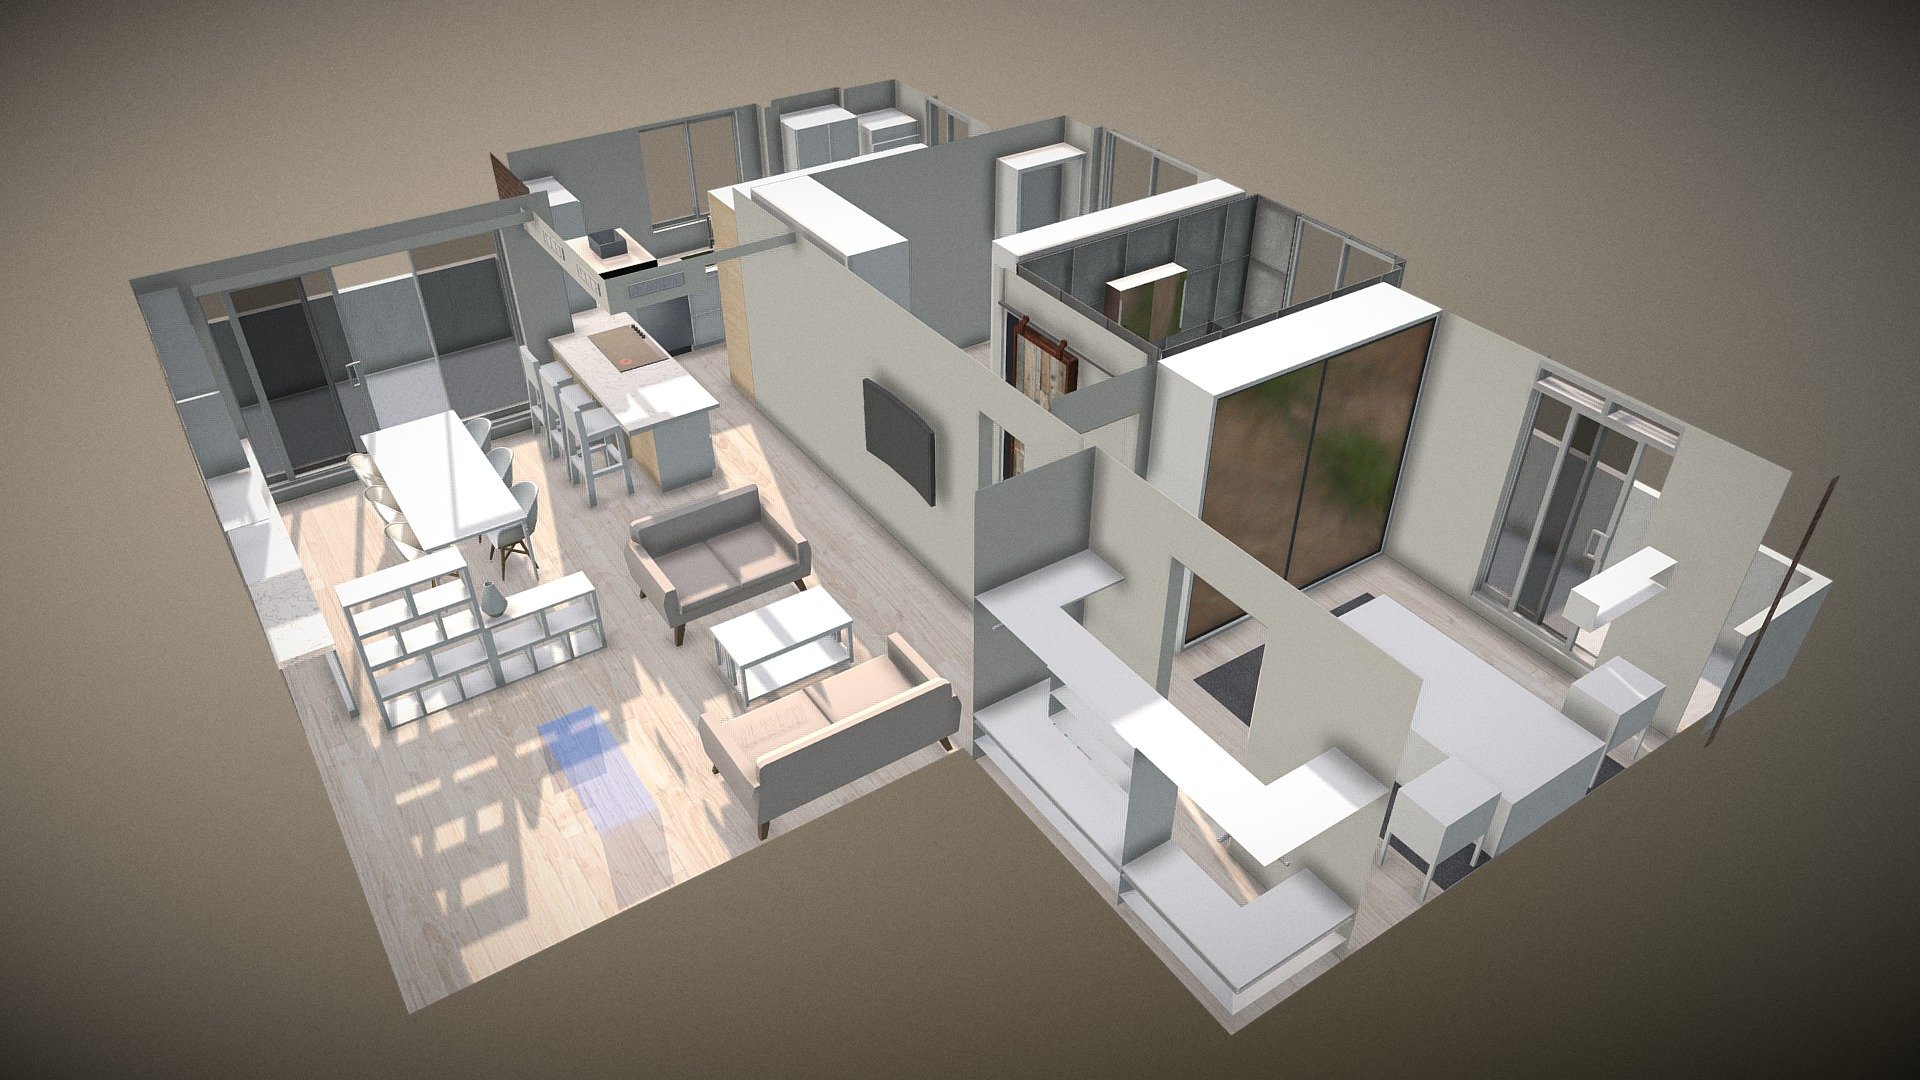 This is a Model I made for a client looking to renovate their Apartment. They hired me wanting a 3D representation of their Apartment with the proposed changes, this is what I made.

It took roughly 17hours to complete, this was due to continual changes made by the client and making to scale. I am happy with the finished product and have learned a great deal from doing this, both with using the intergrated sketchfab settings and with Maya.

Any feed back would be greatly appreciated! - Clients Unit Model - 3D model by Declan McCulloch (@DeclanMcCulloch) 3d model